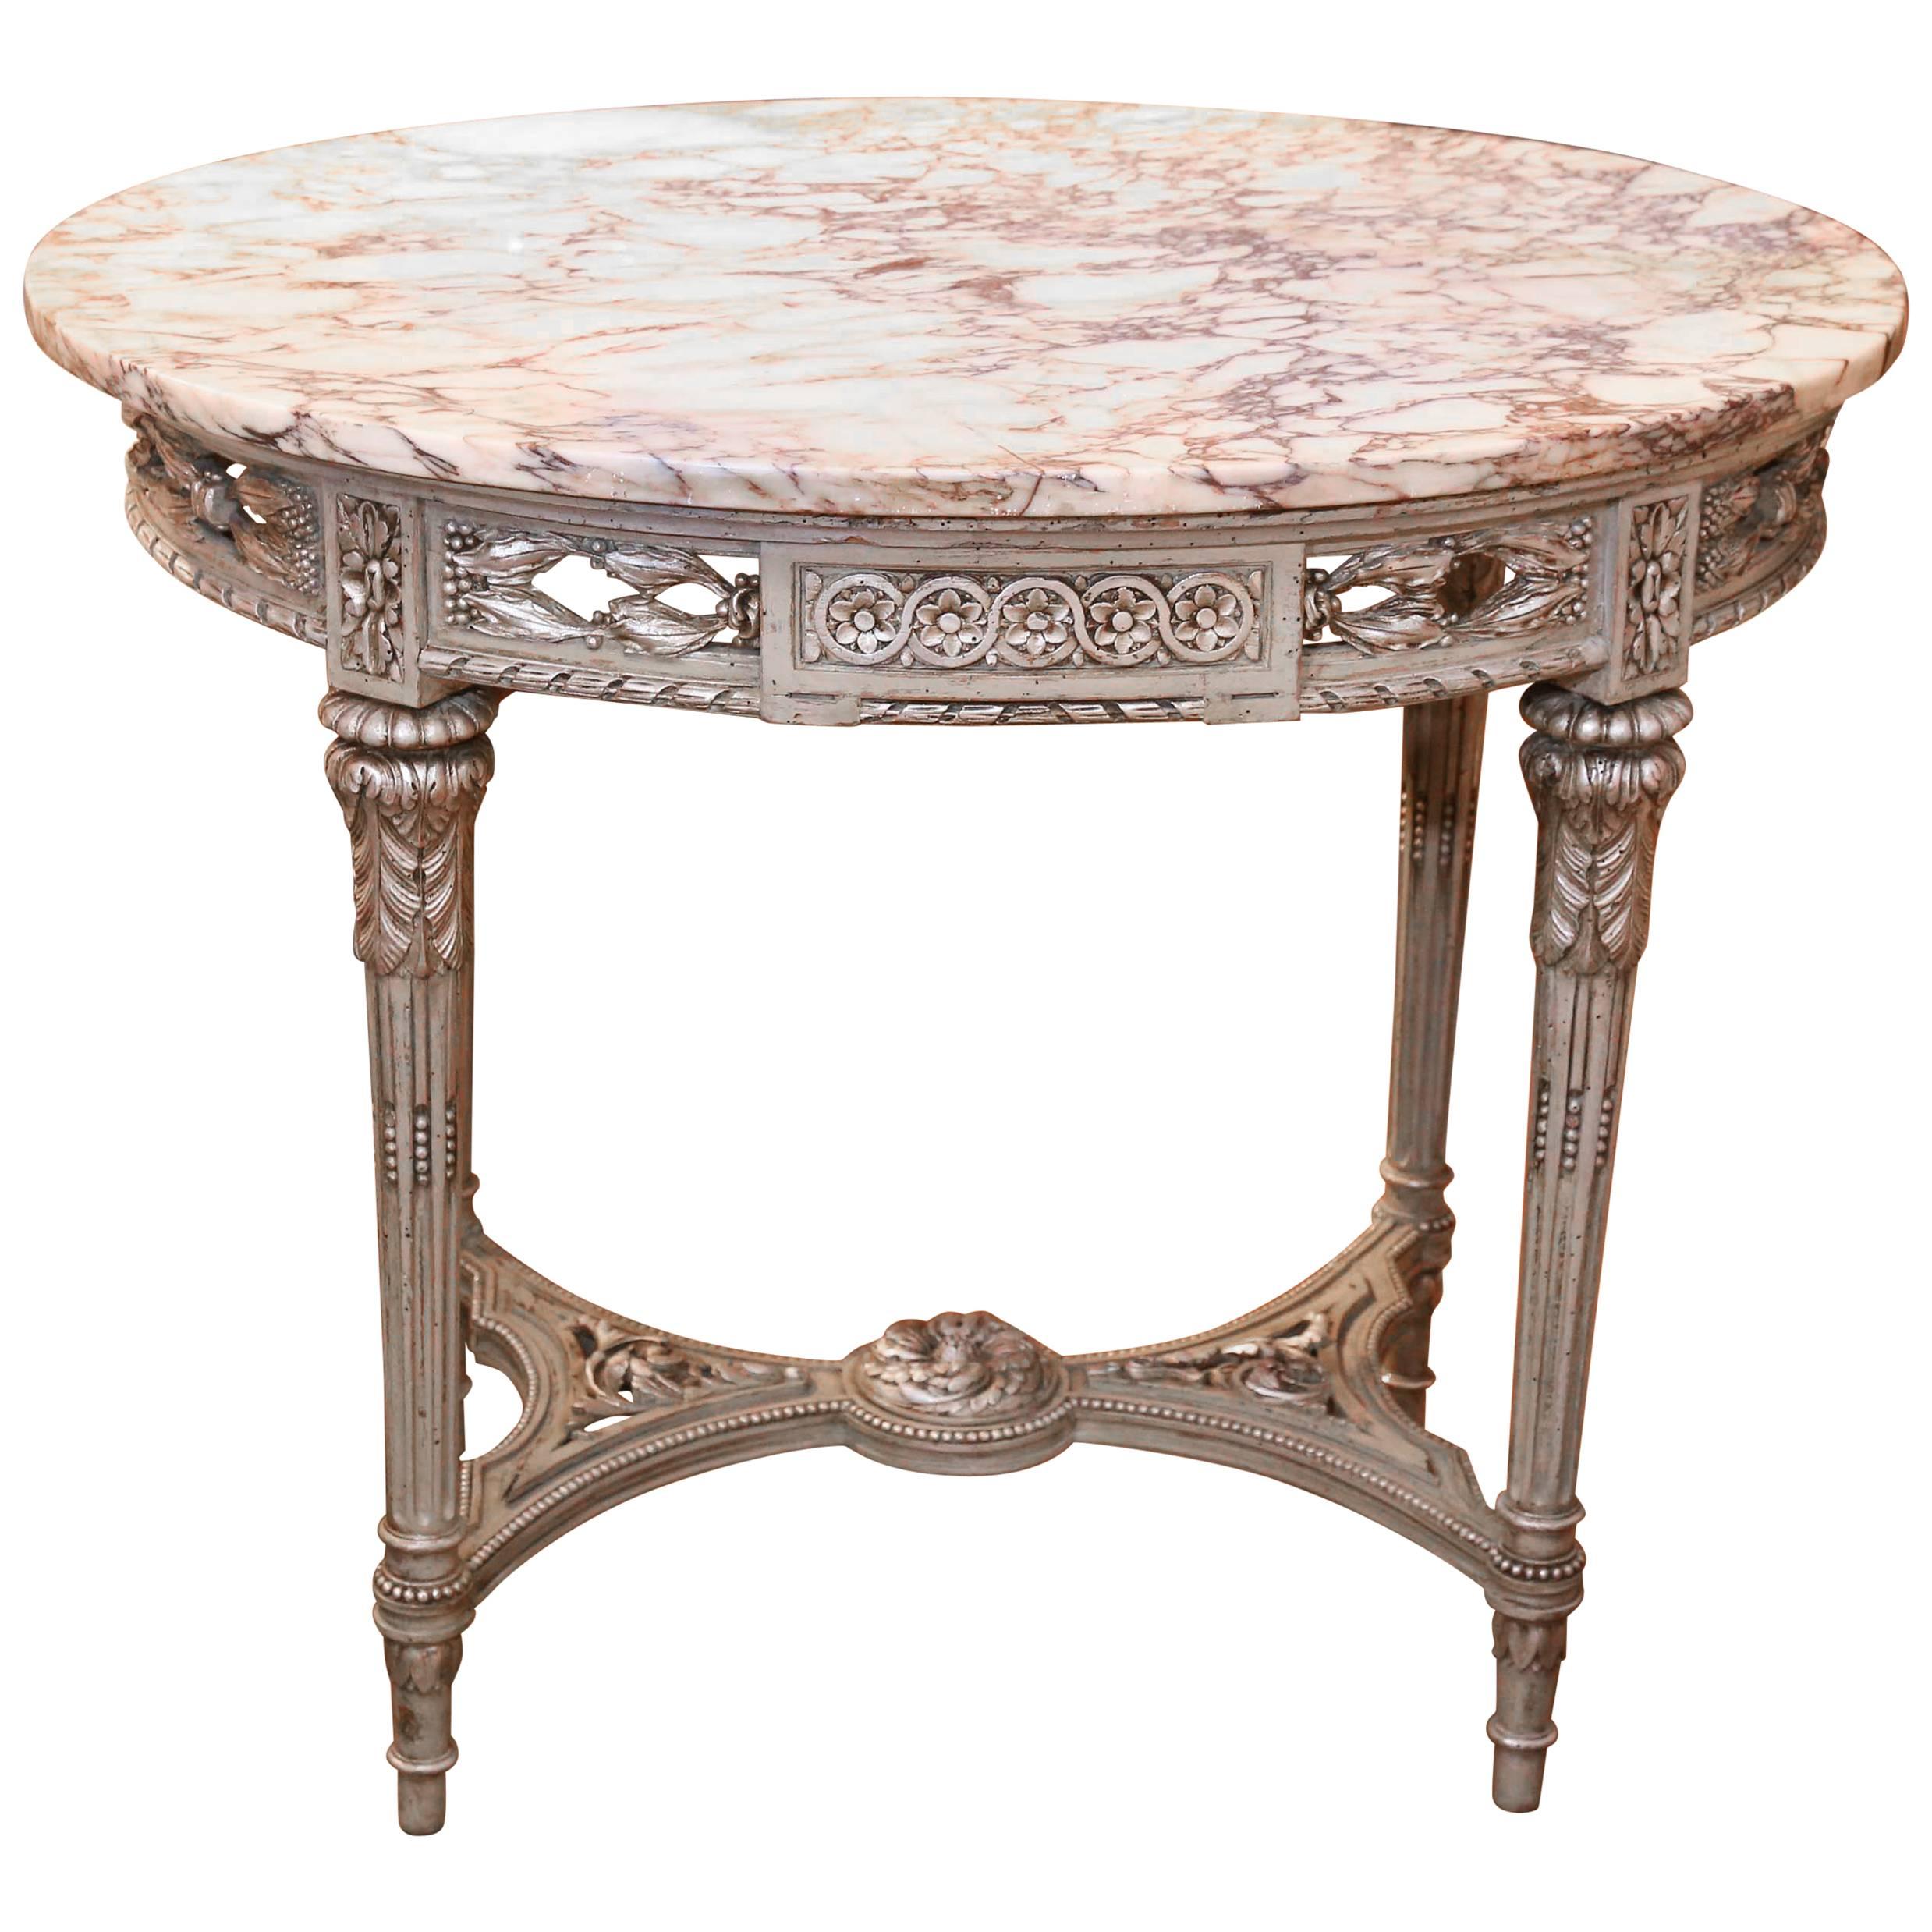 19th Century French Center Table, Painted in Gray Green/Silver Accents